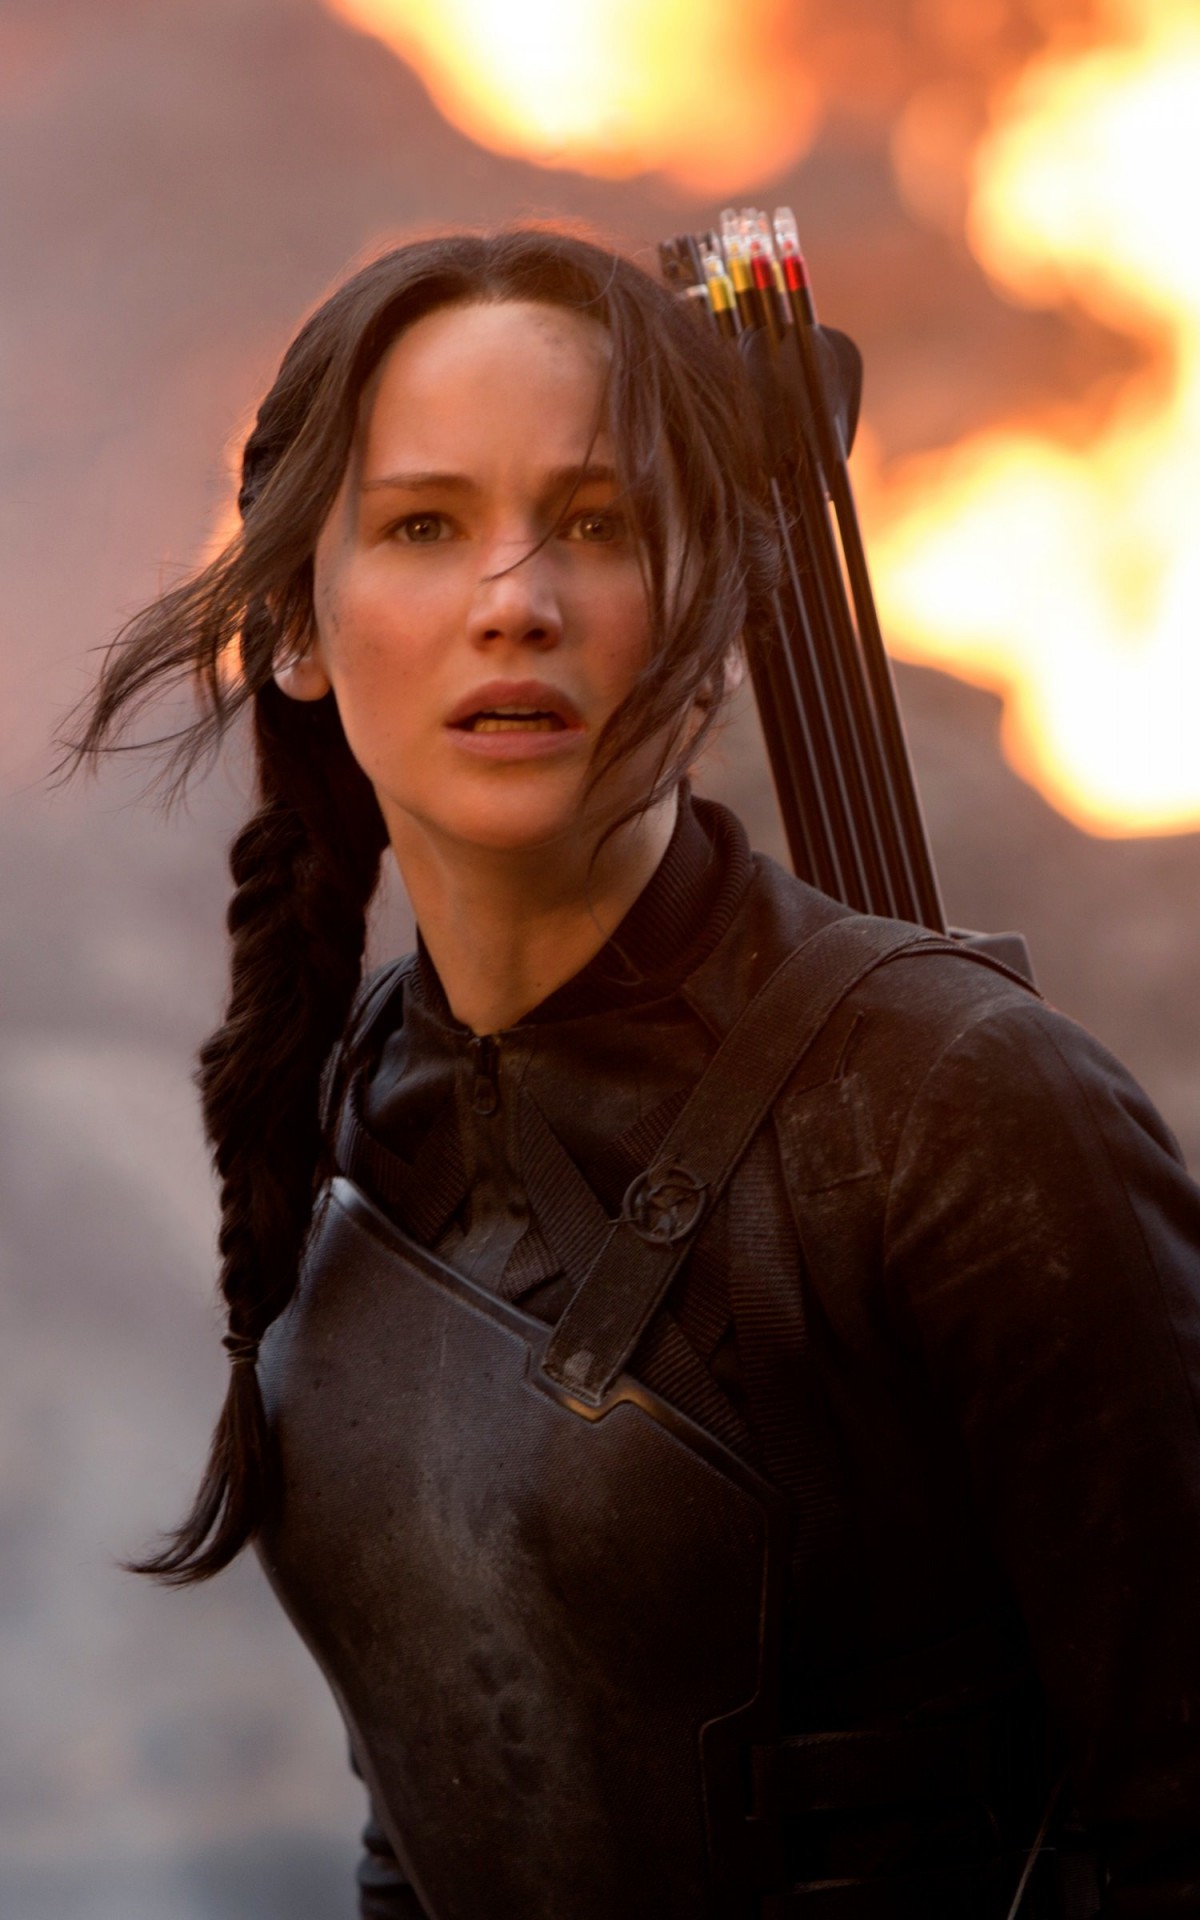 Jennifer Lawrence in The Hunger Games Wallpaper for Amazon Kindle Fire HDX